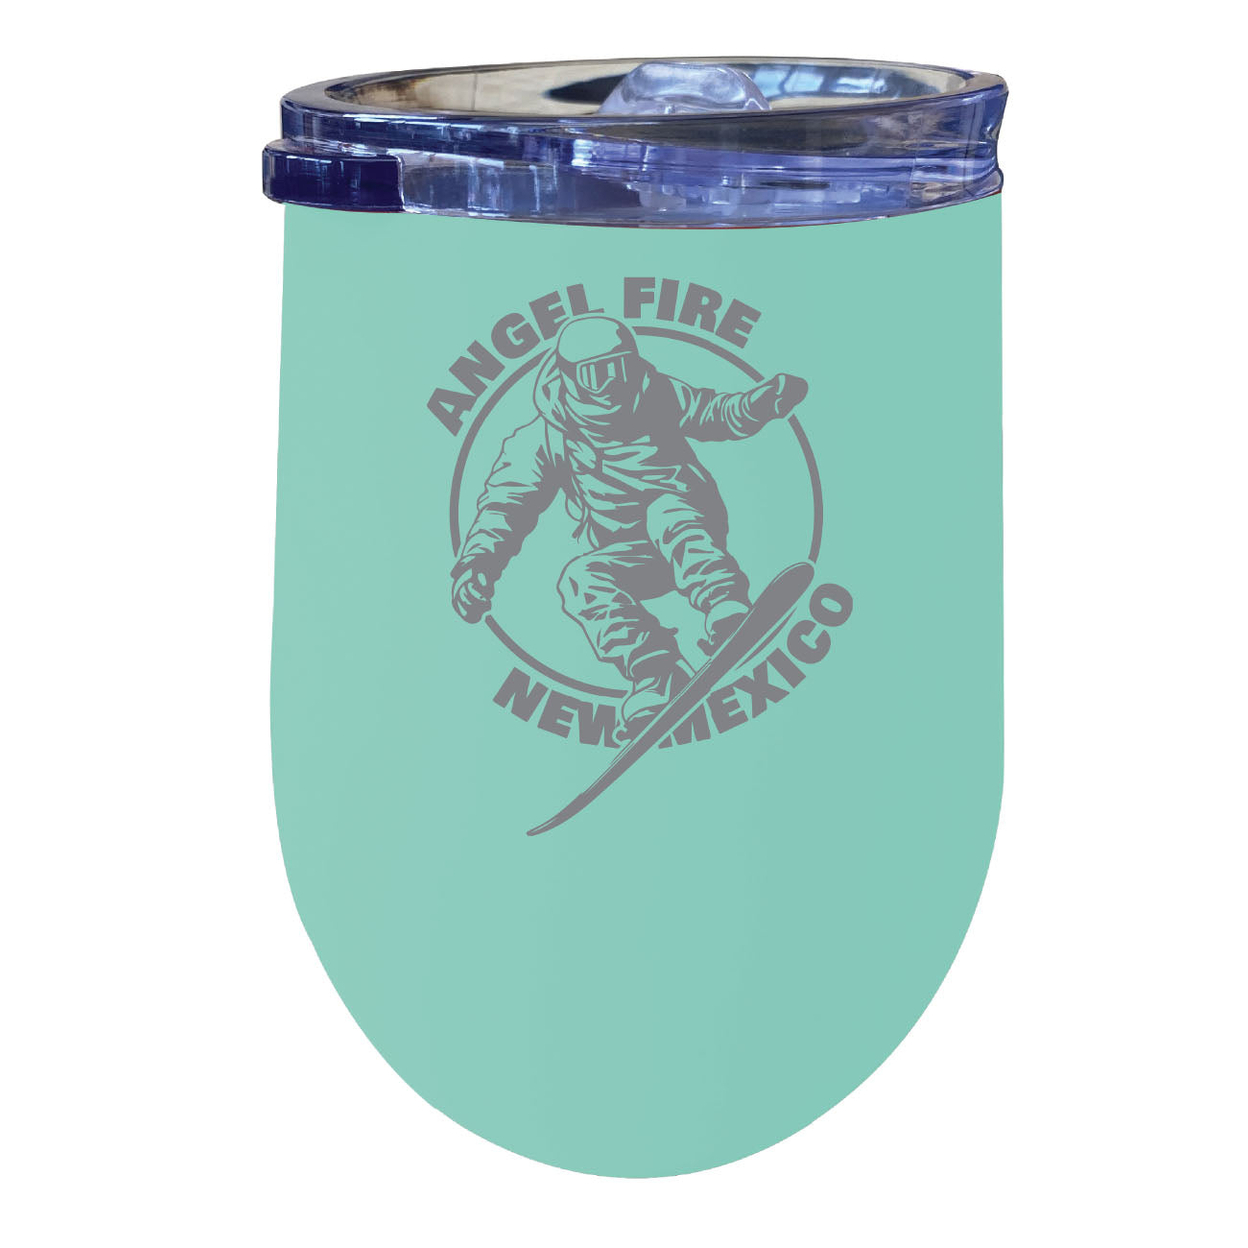 Angel Fire New Mexico Souvenir 12 Oz Engraved Insulated Wine Stainless Steel Tumbler - Seafoam,,Single Unit